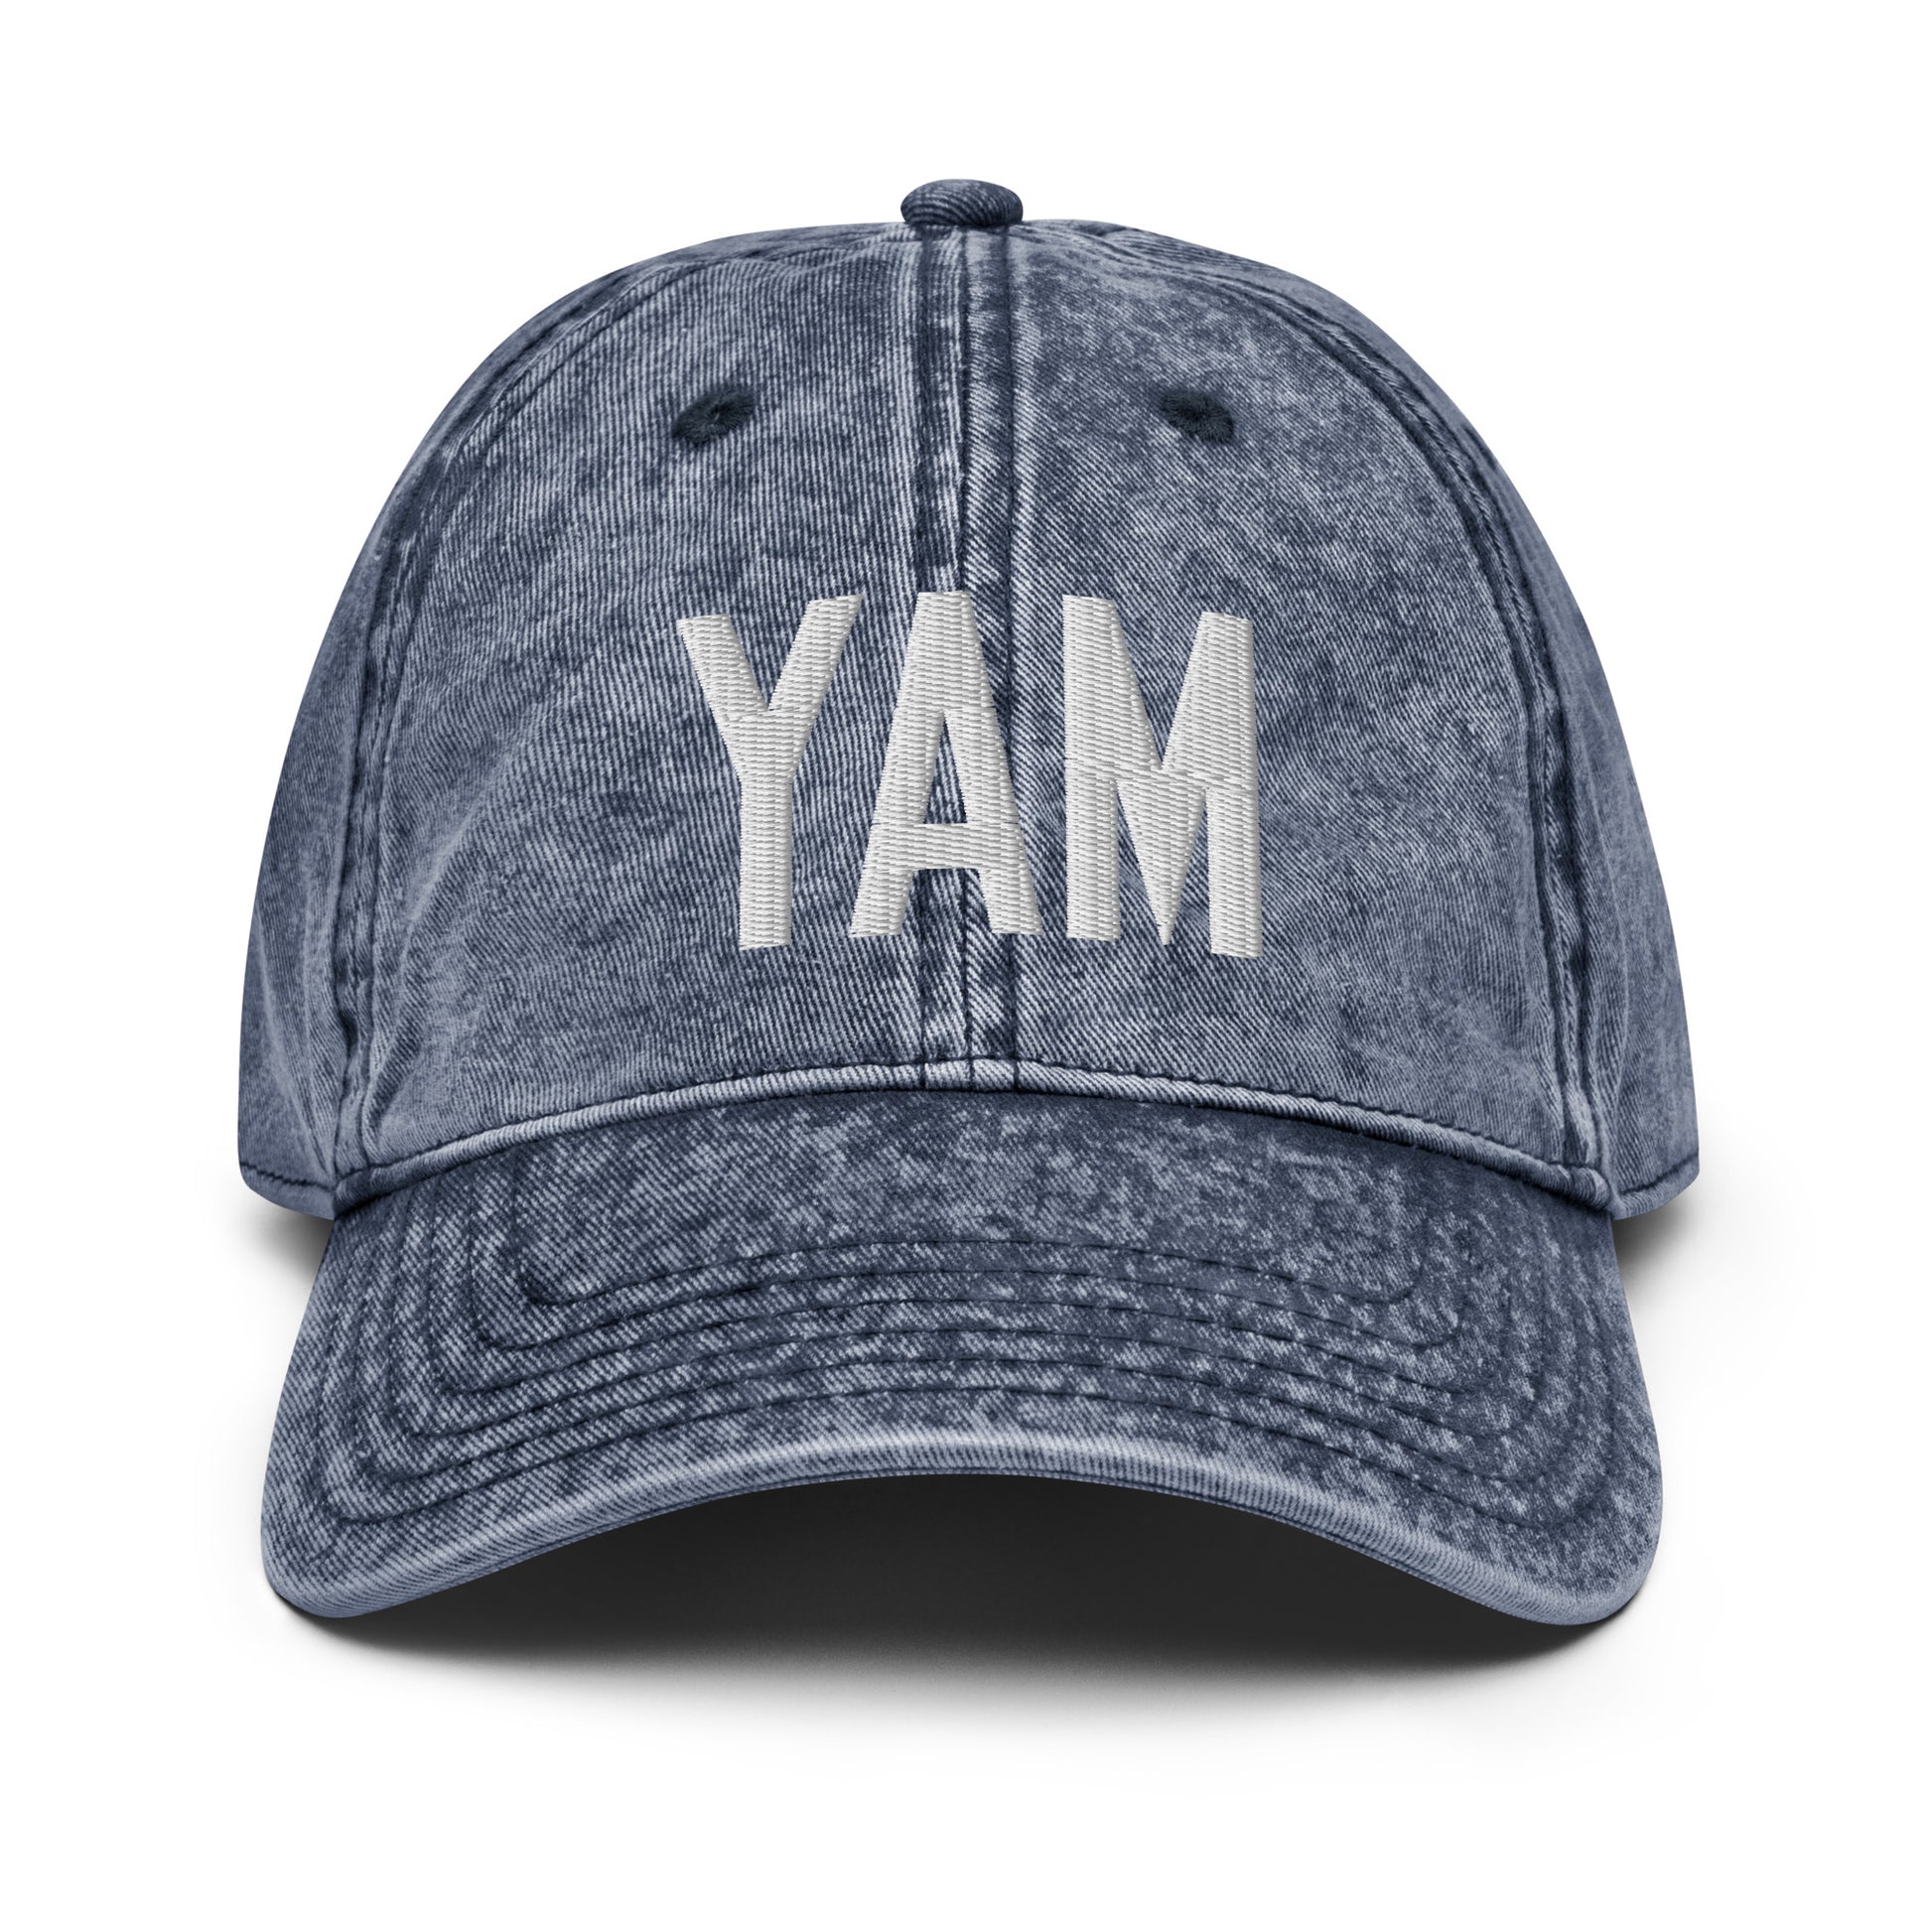 Airport Code Twill Cap - White • YAM Sault-Ste-Marie • YHM Designs - Image 16